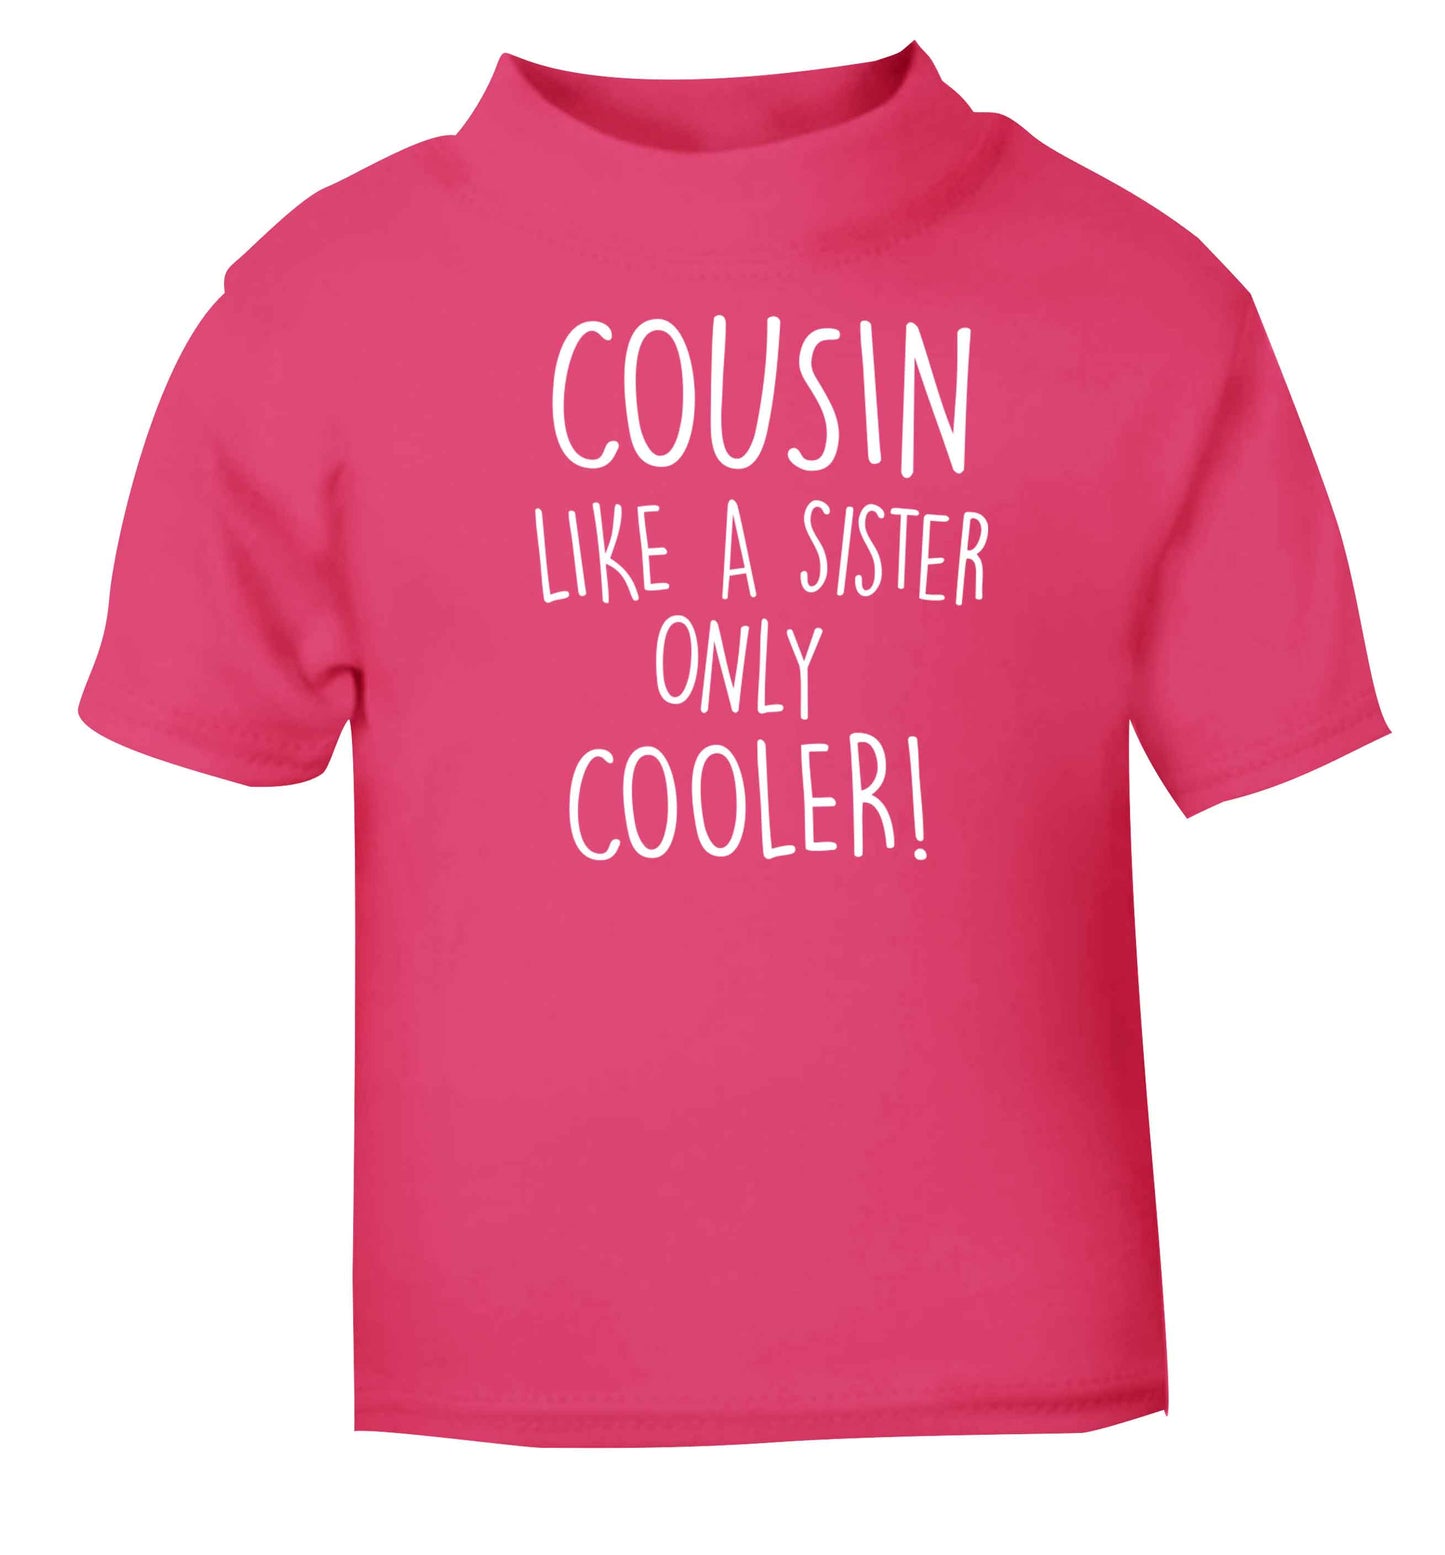 Cousin like a sister only cooler pink baby toddler Tshirt 2 Years